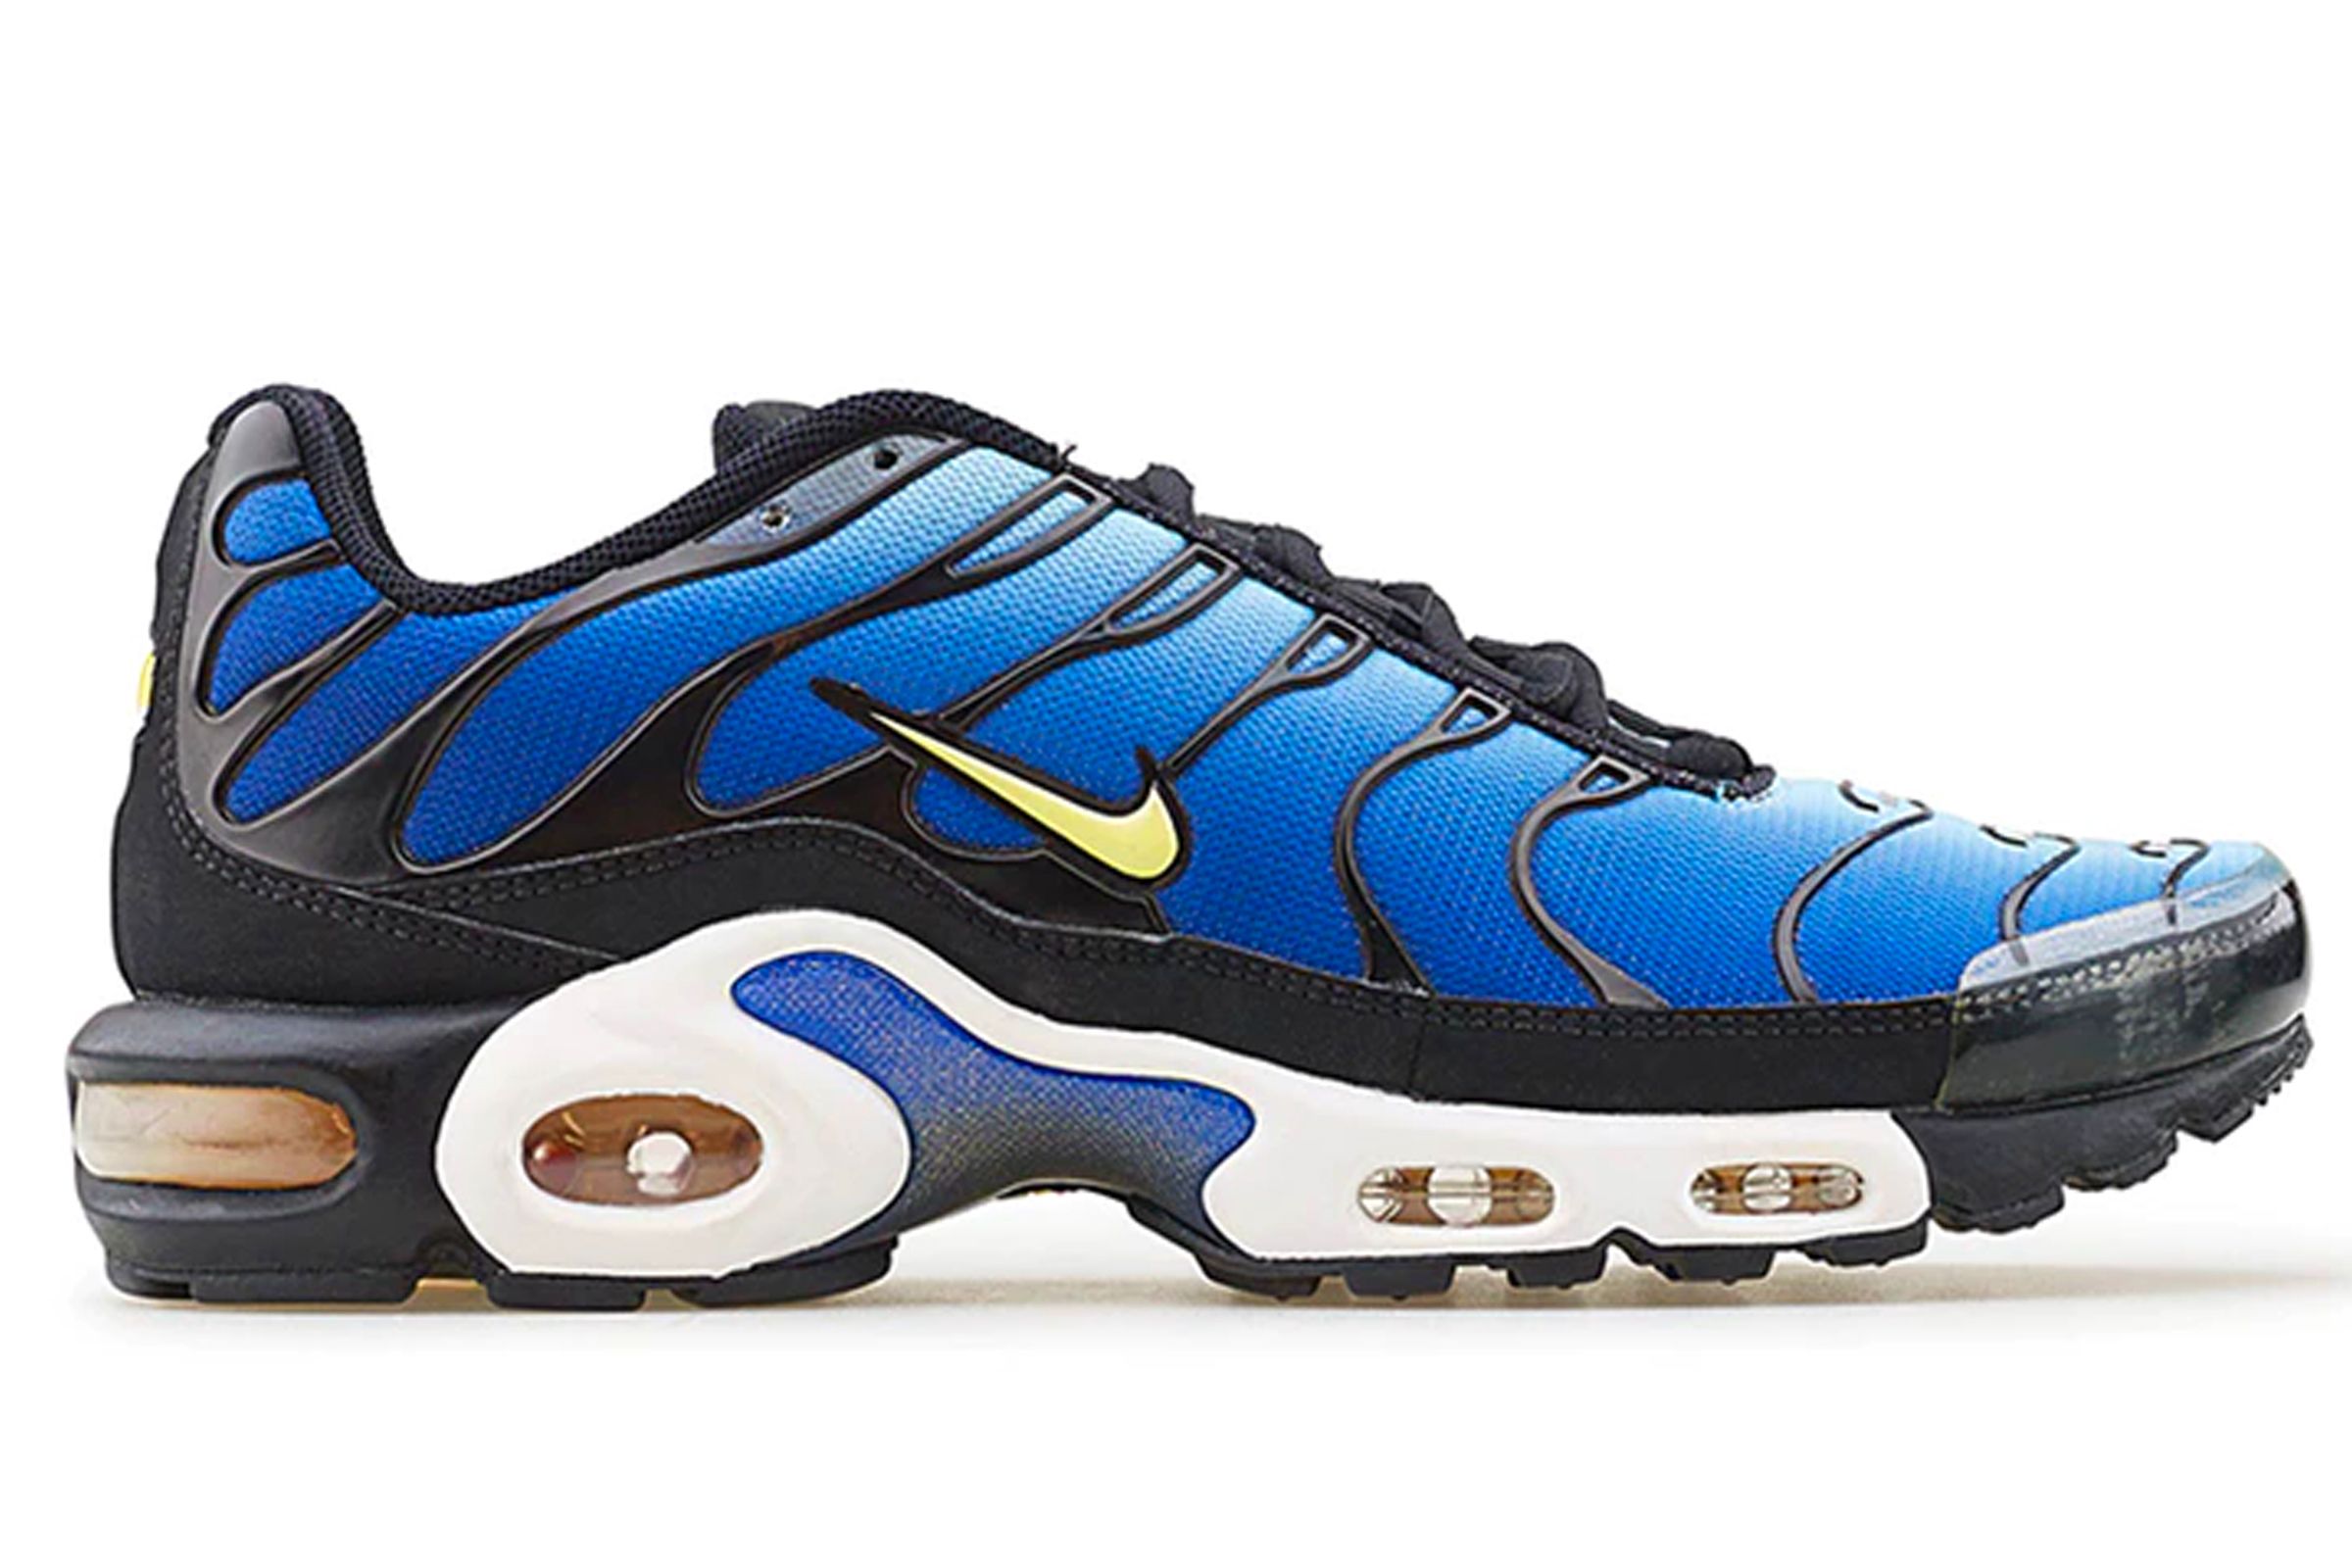 Buy the Supreme x Nike Air Max Plus TN Mean Green Right Here